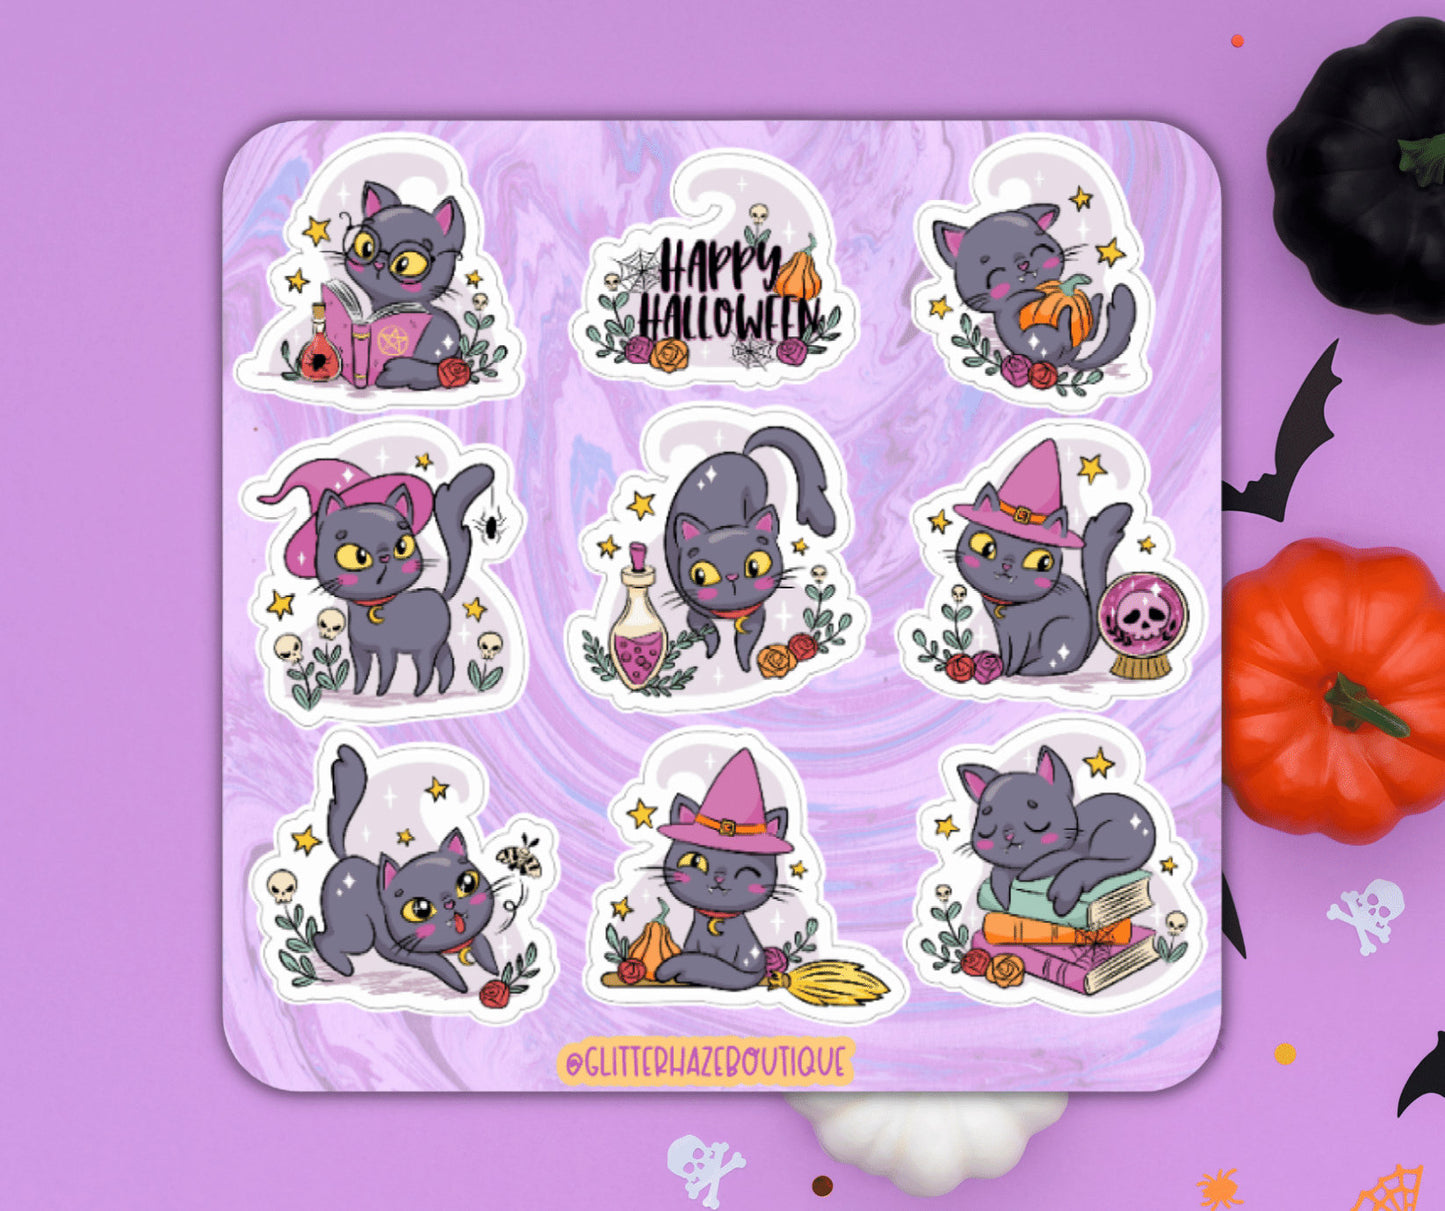 Halloween Cat Stickers | Black Cat | 9 Pack Glossy Vinyl Water Resistant Laptop Sticker | Kawaii Stickers | Black Cat Decal | Anime Stickers